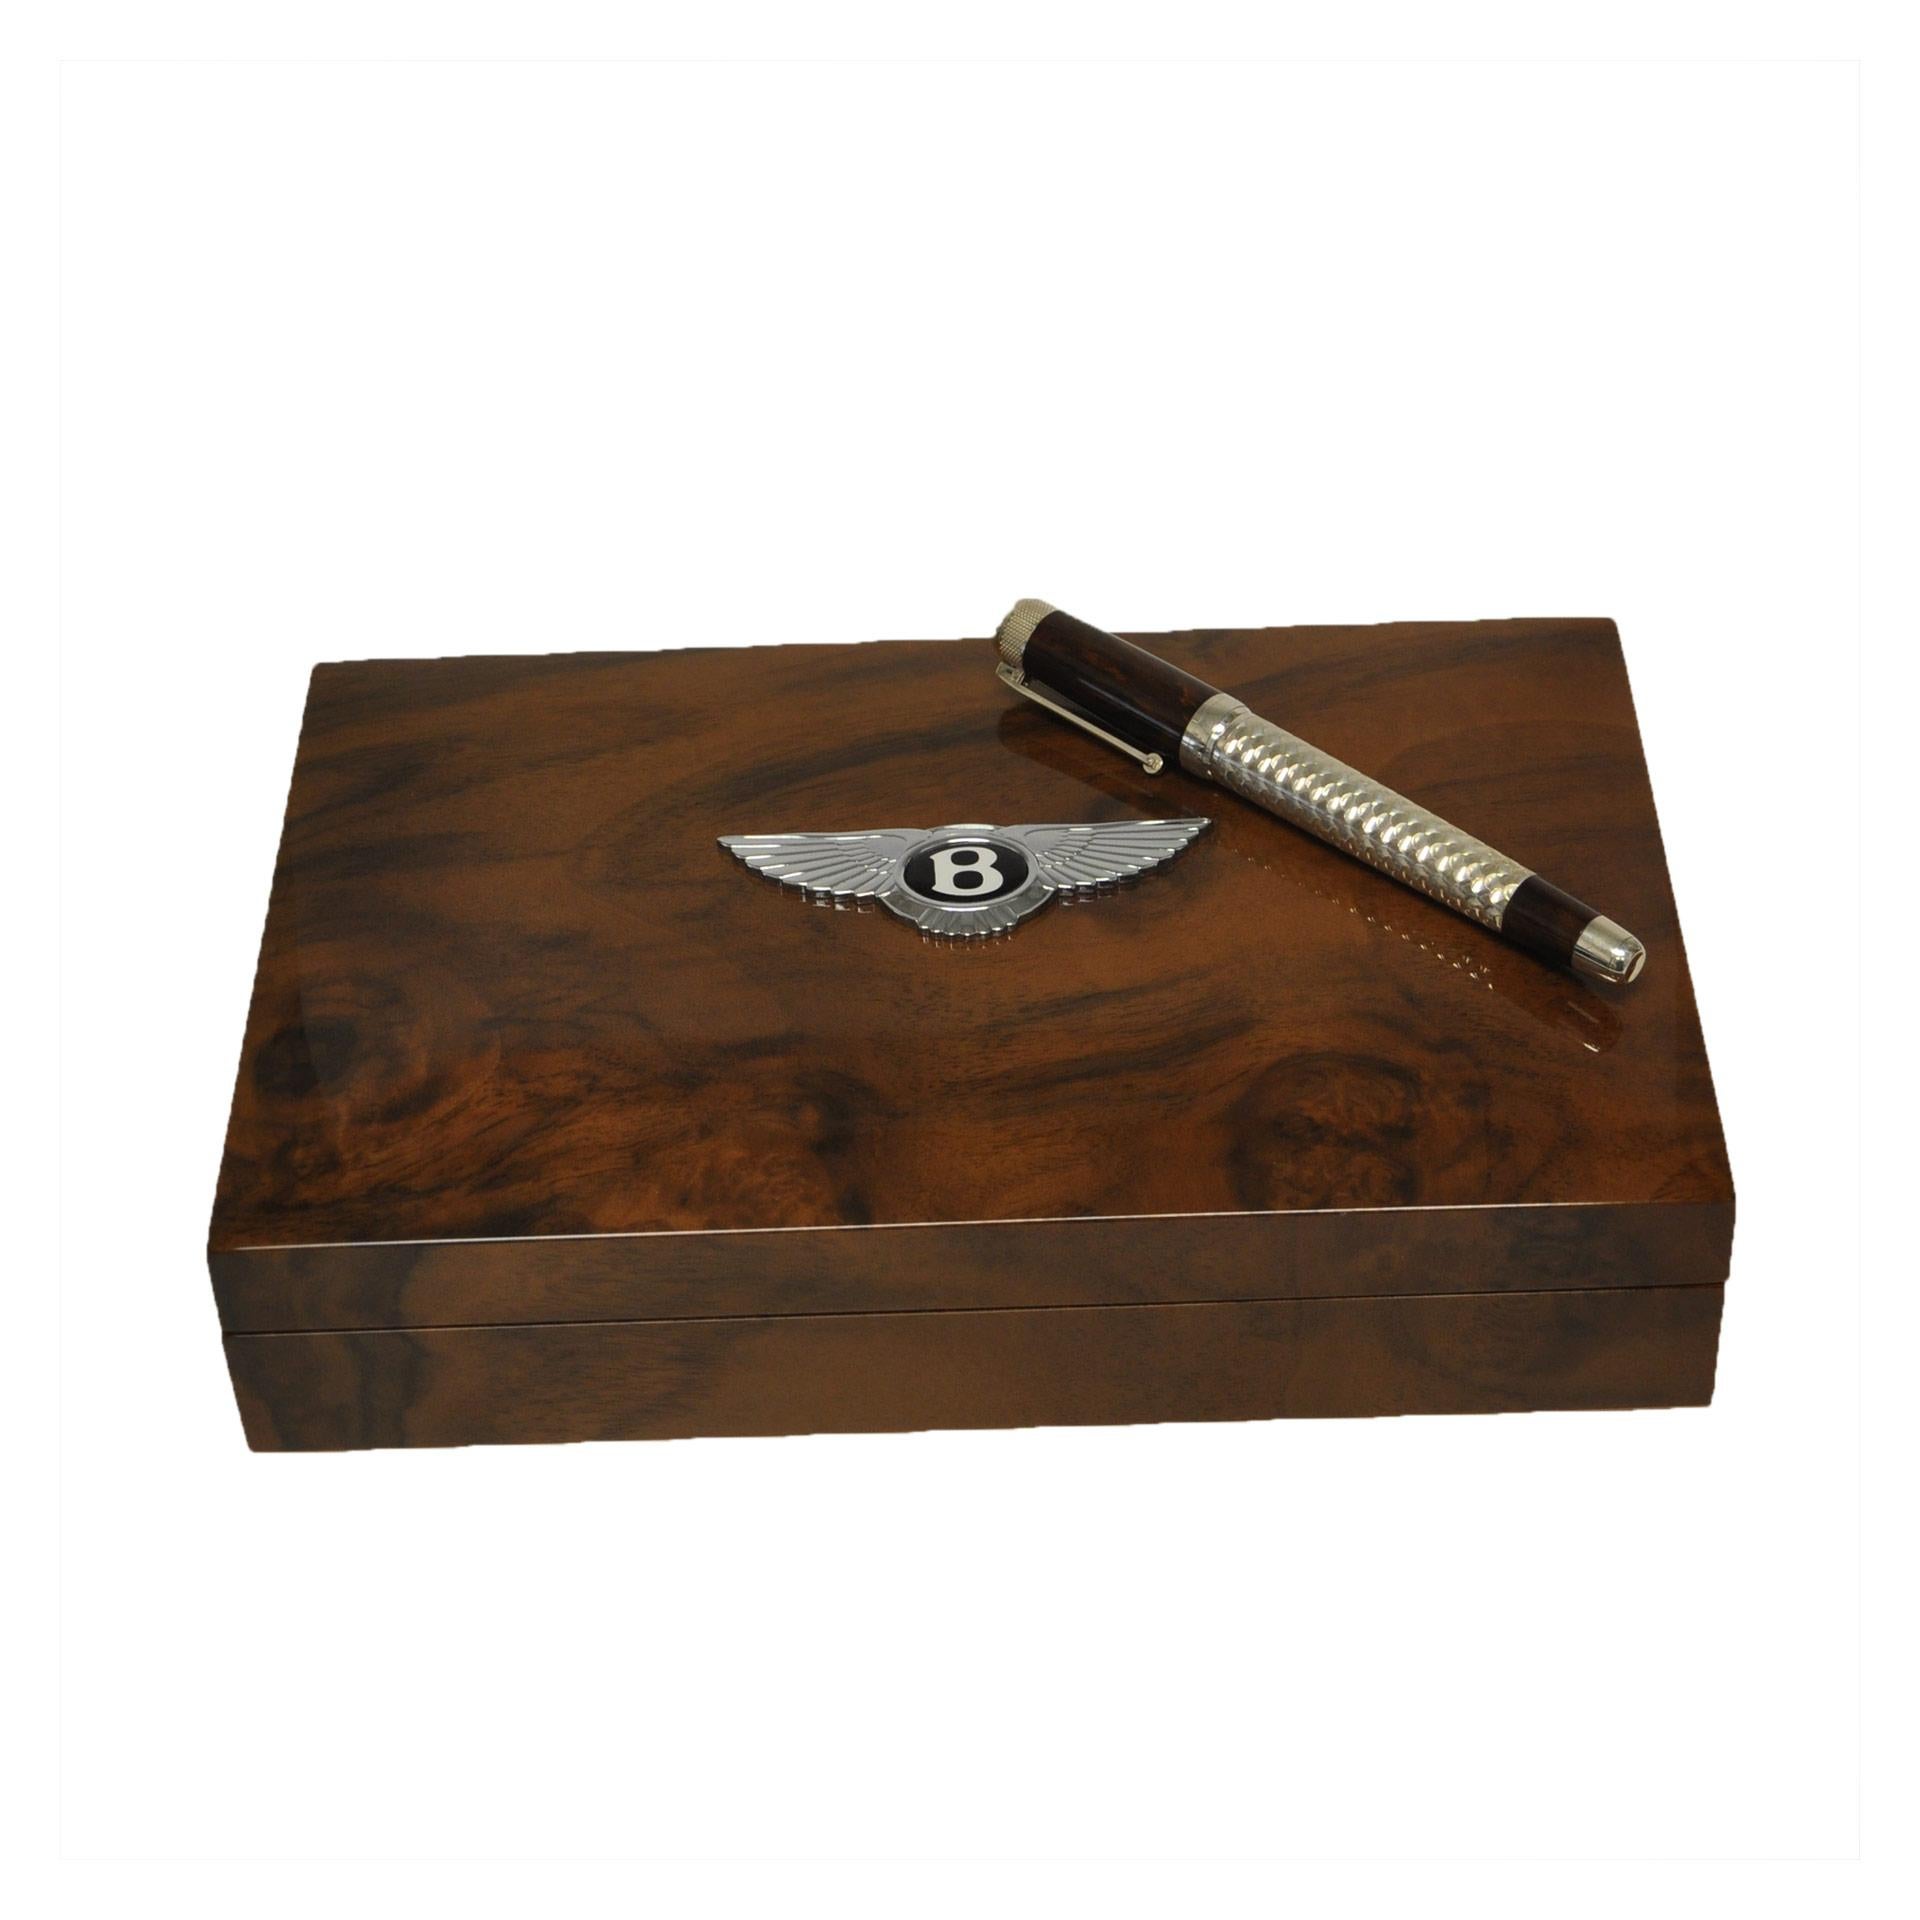 Limited edition Tibaldi for Bentley Mulsanne Dark stained Varvona fountain pen in sterling silver with 18k nib 37/ 90. Made in Italy. New, complete with presentation box and papers.
